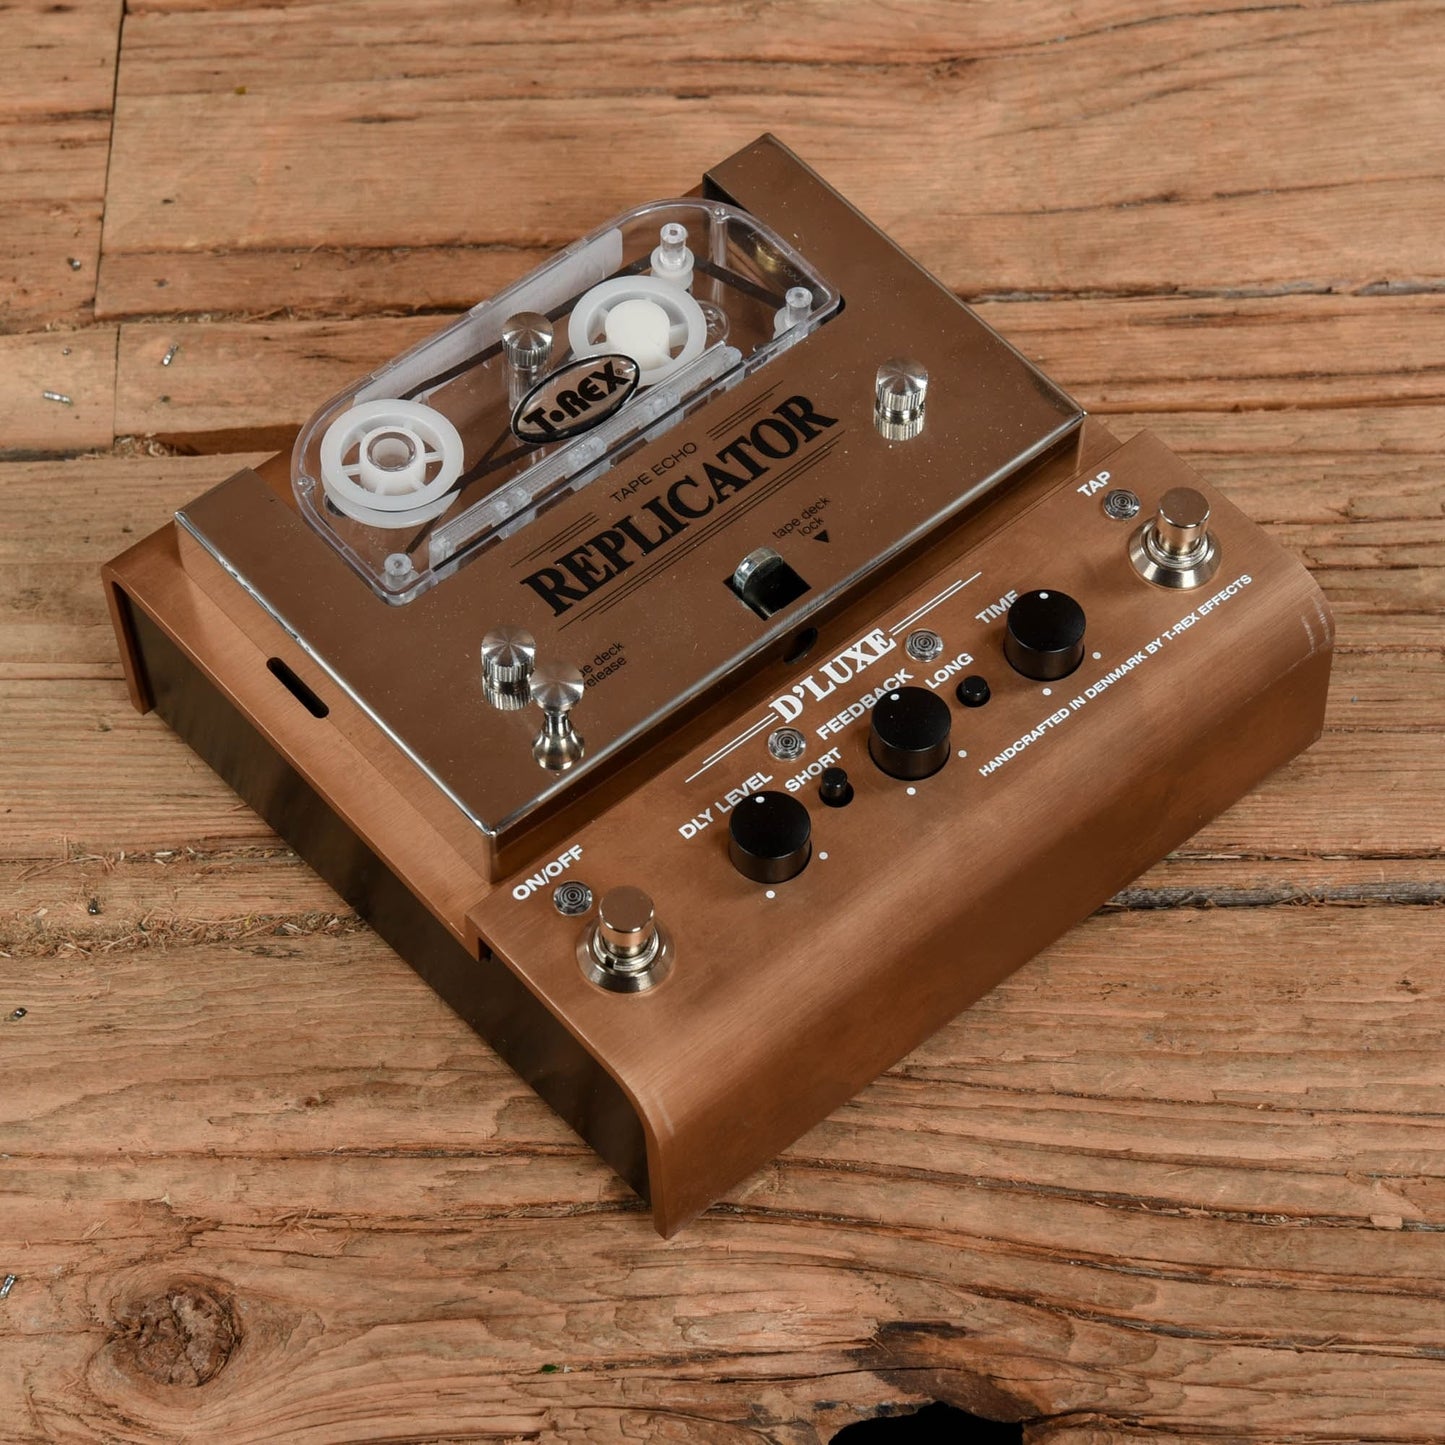 T-Rex Replicator D'luxe Tape Echo Effects and Pedals / Delay